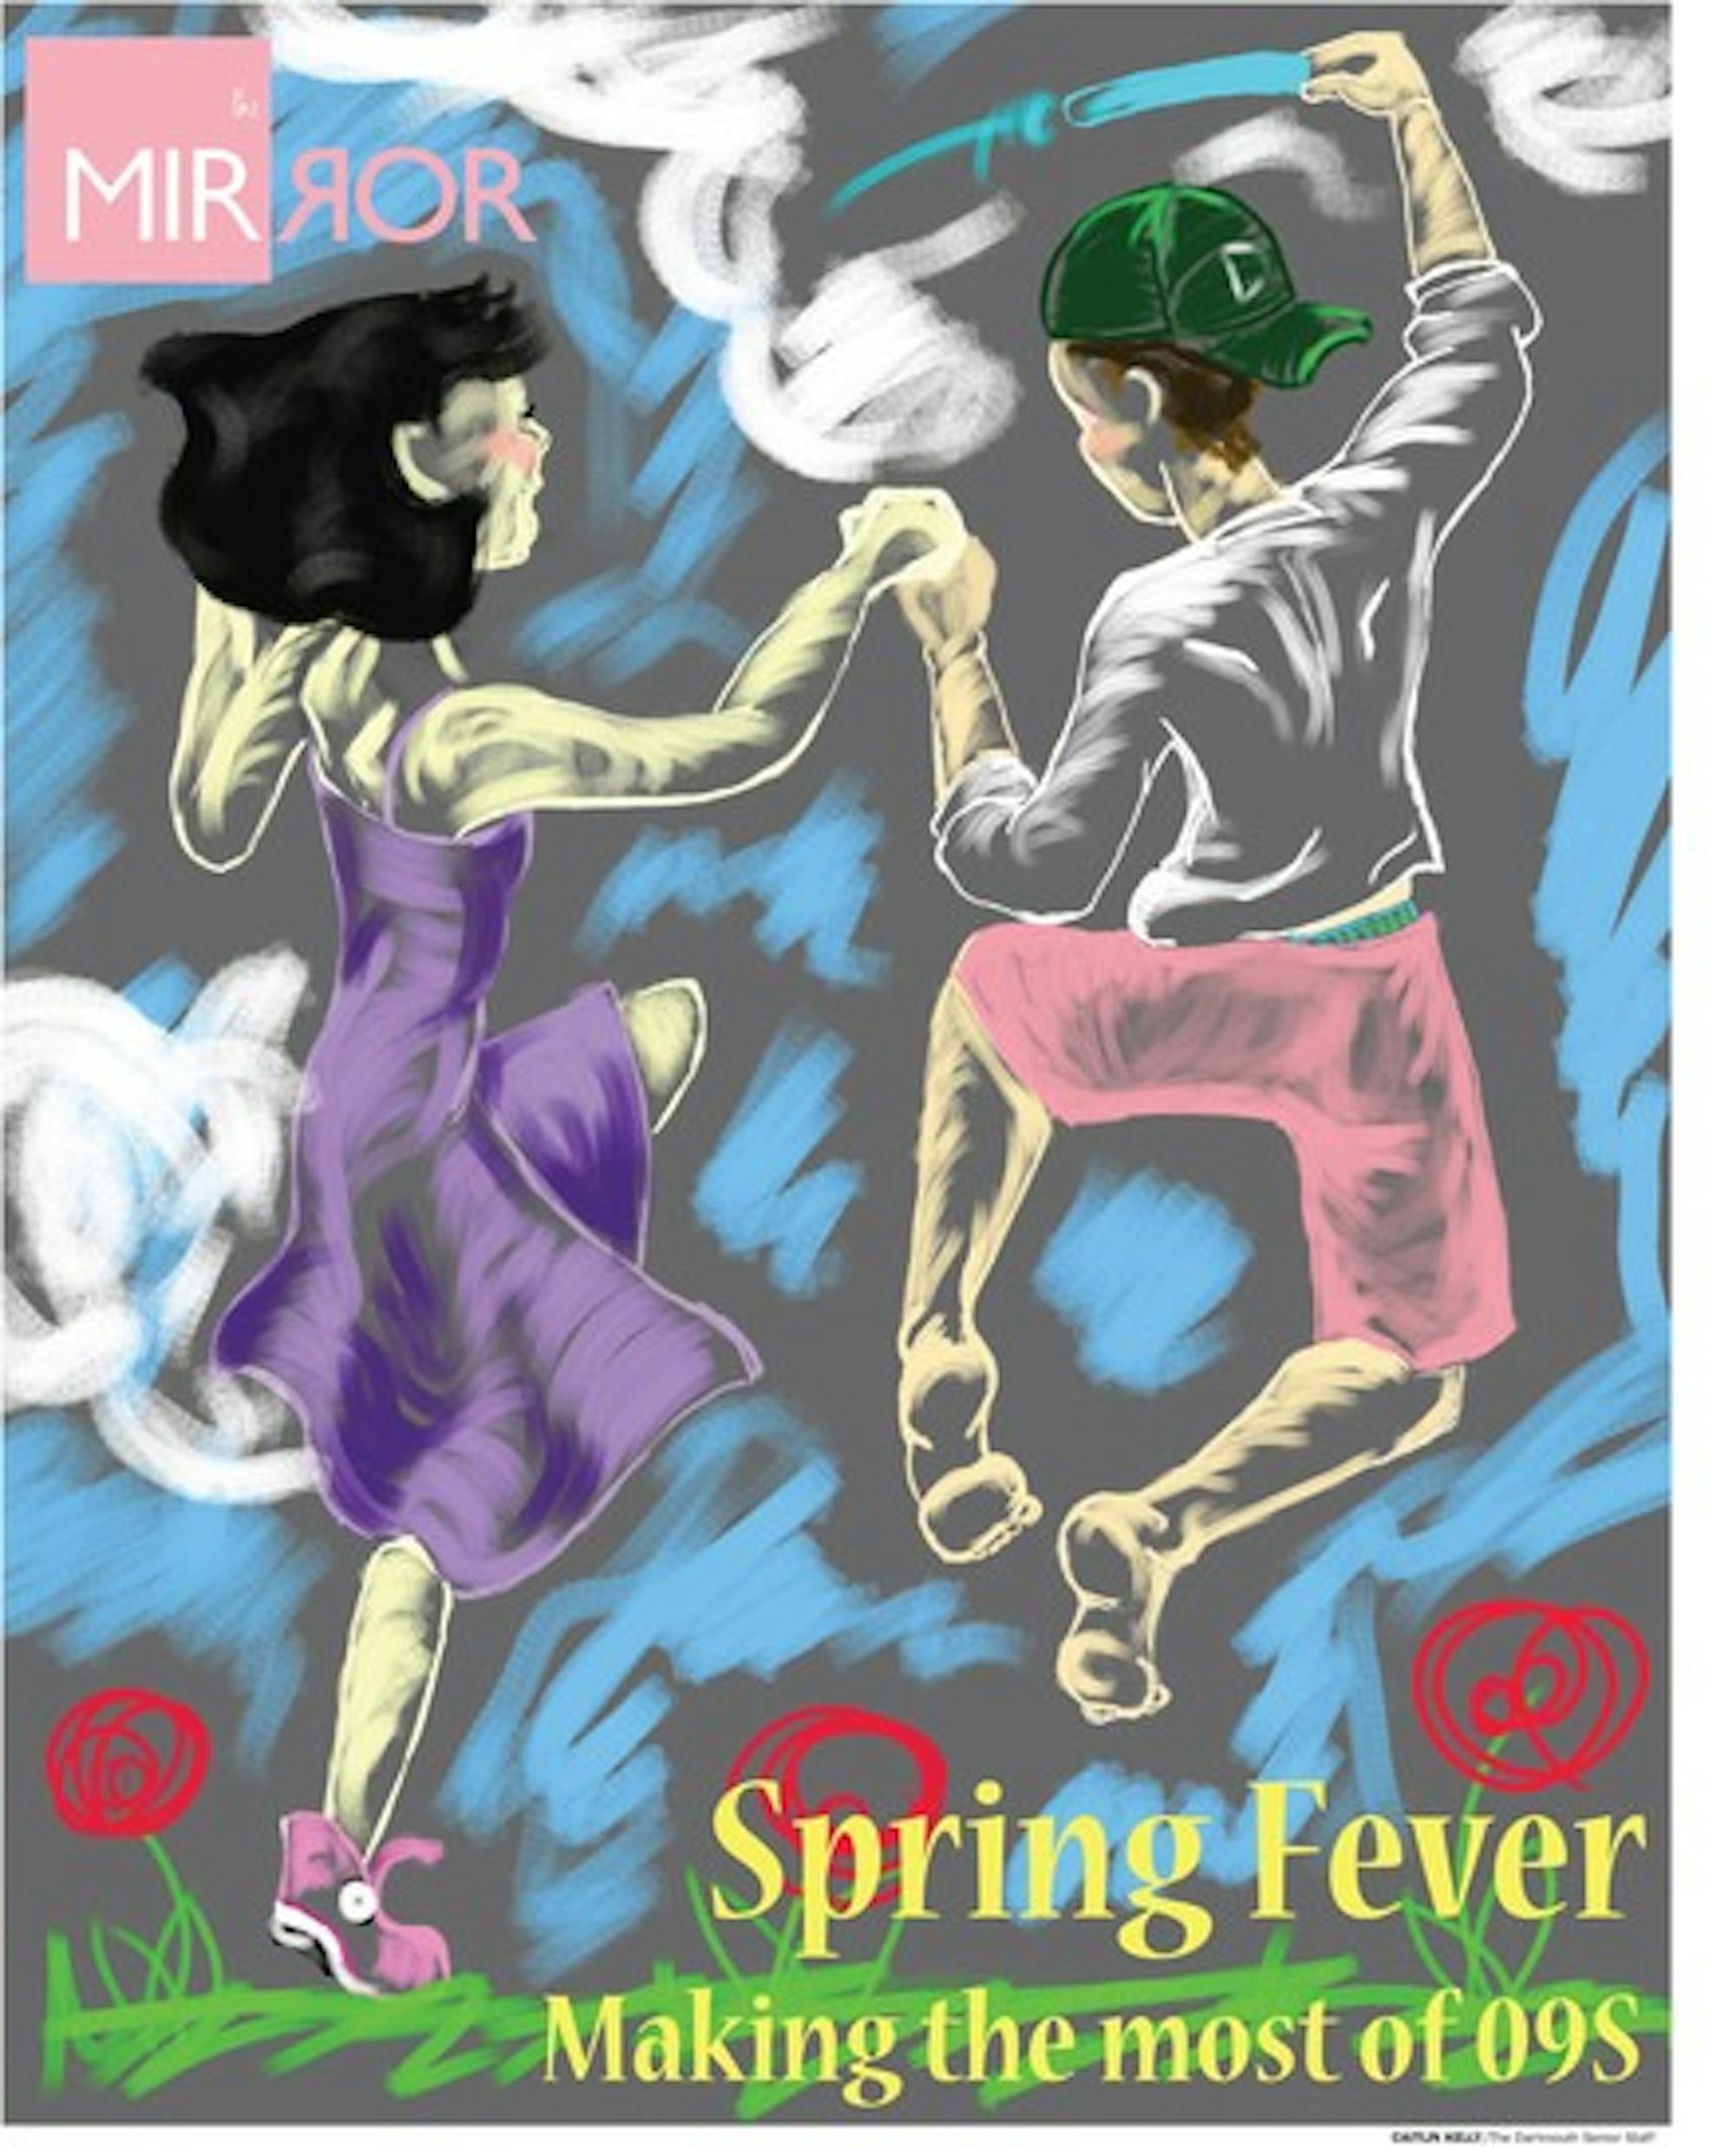 The Mirror: Spring Fever